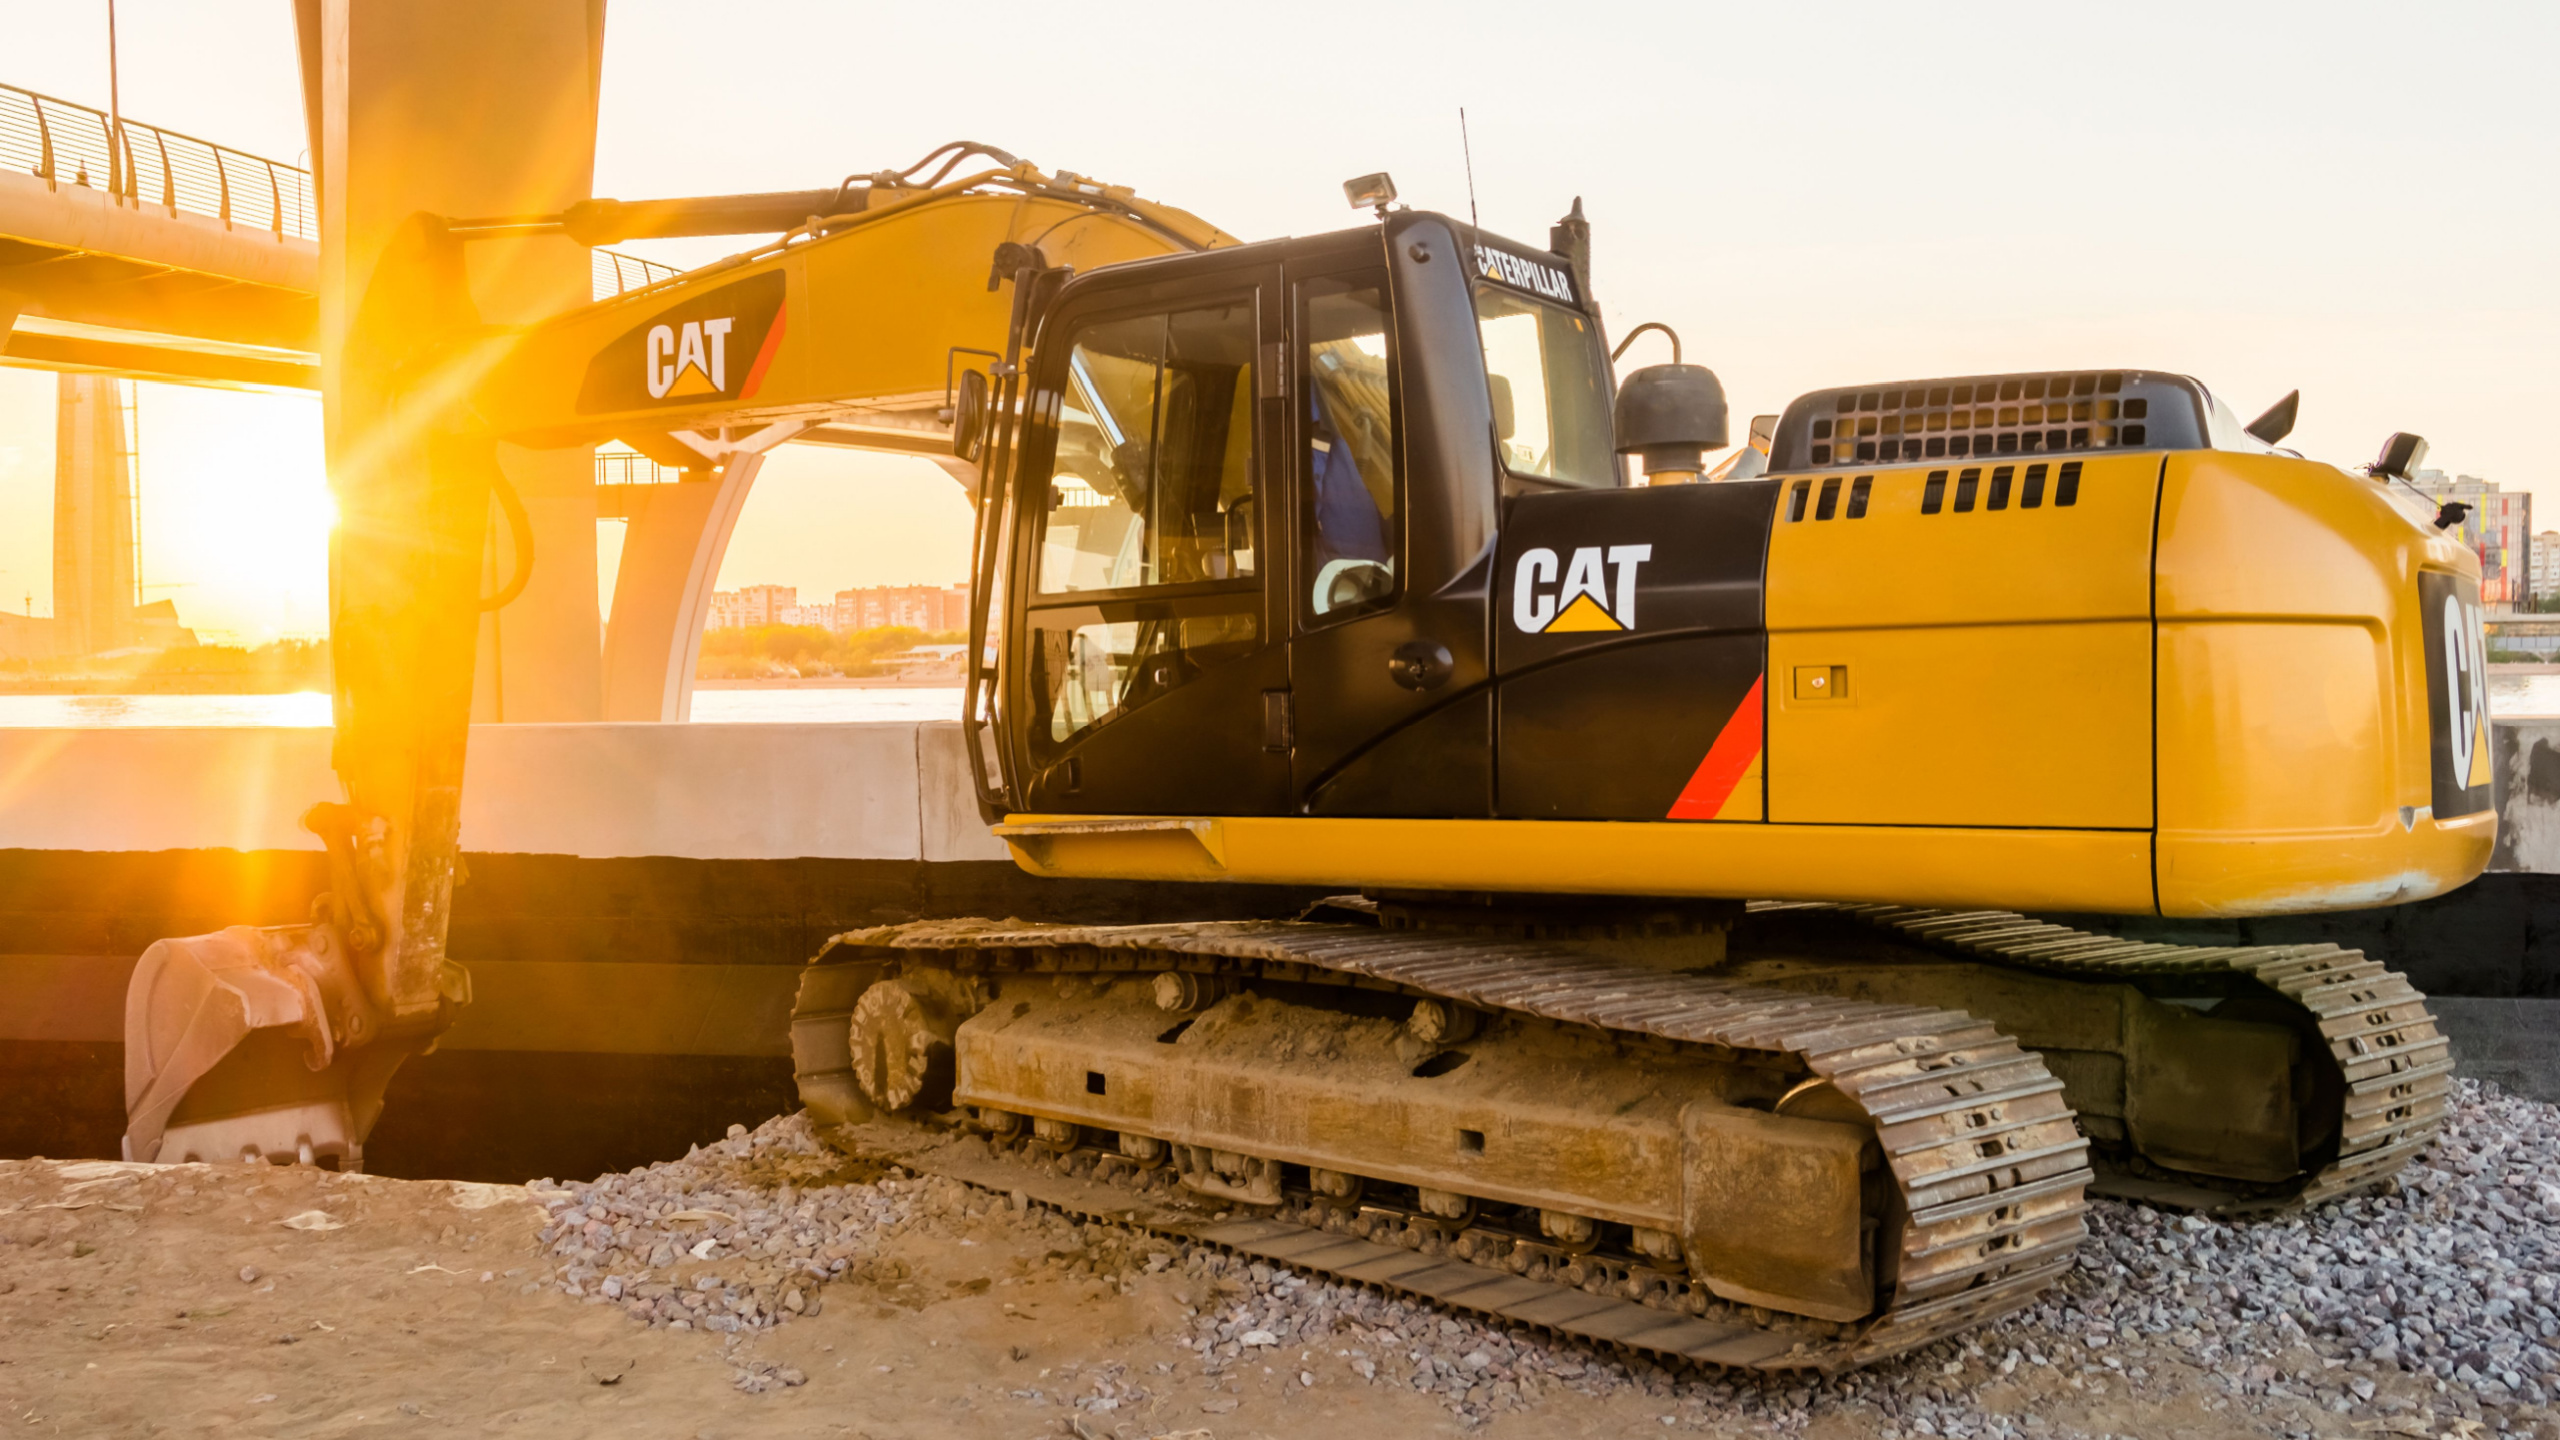 Caterpillar machinery at a construction site. 